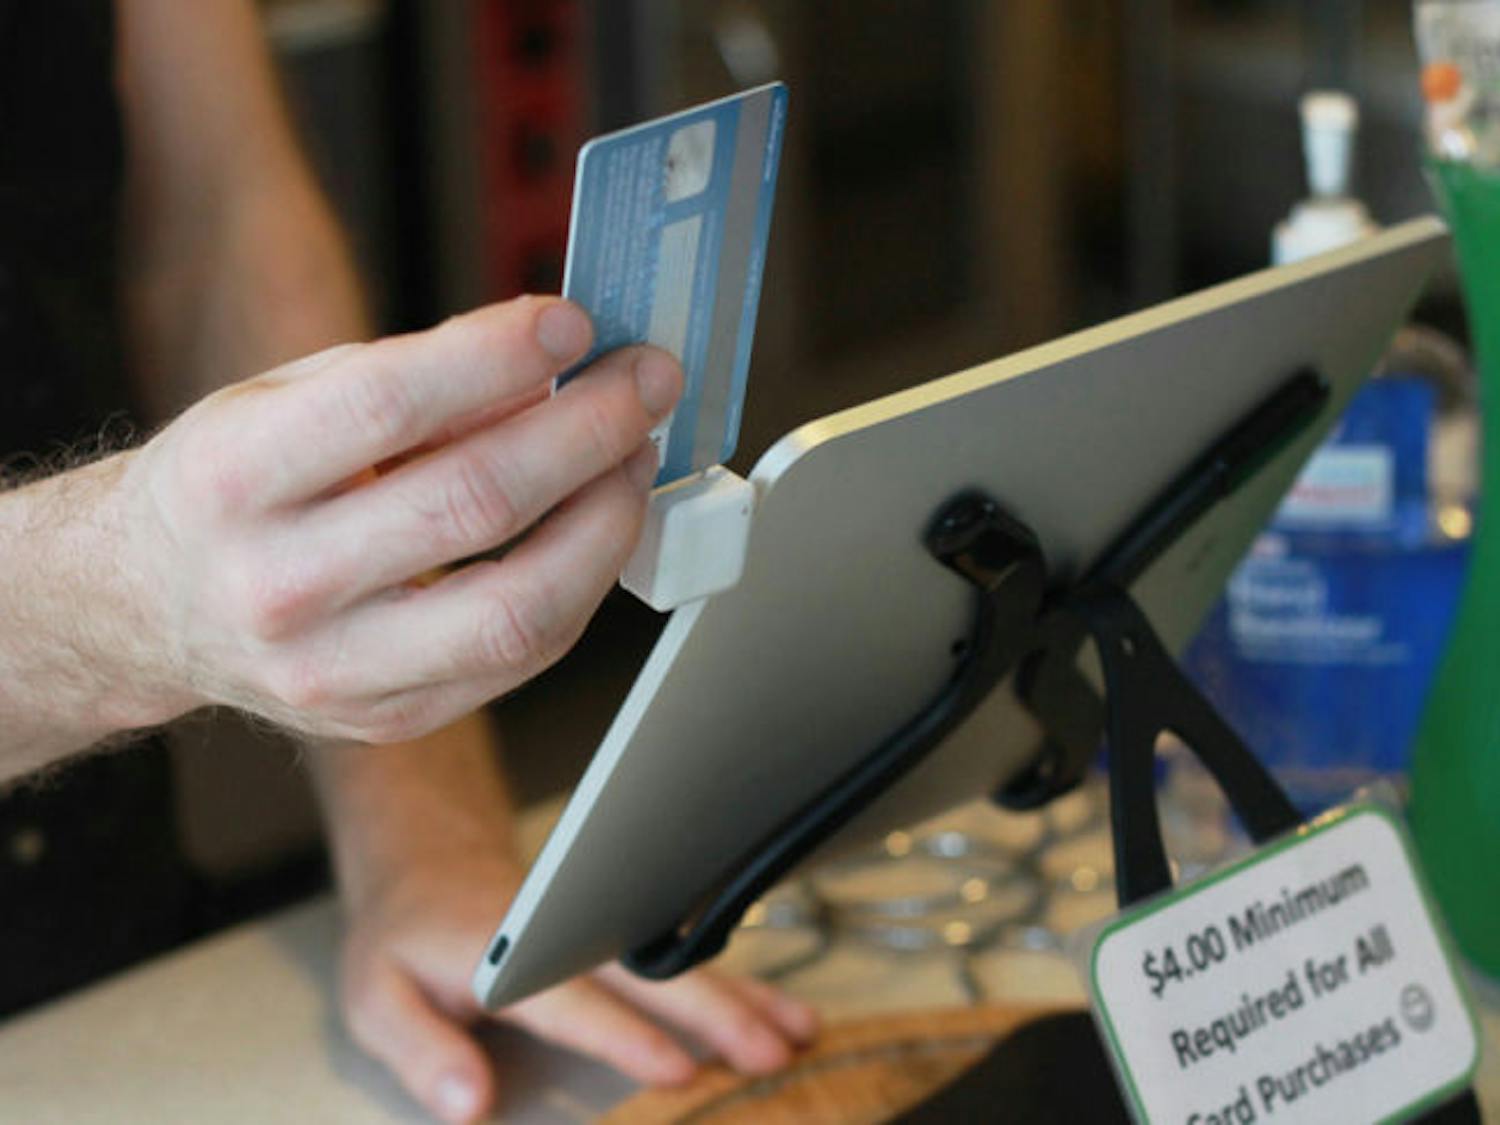 A Karma Cream employee swipes a credit card on an iPad card reader to complete a transaction Wednesday. Business owners cite portability and saving space as benefits to using the card readers.